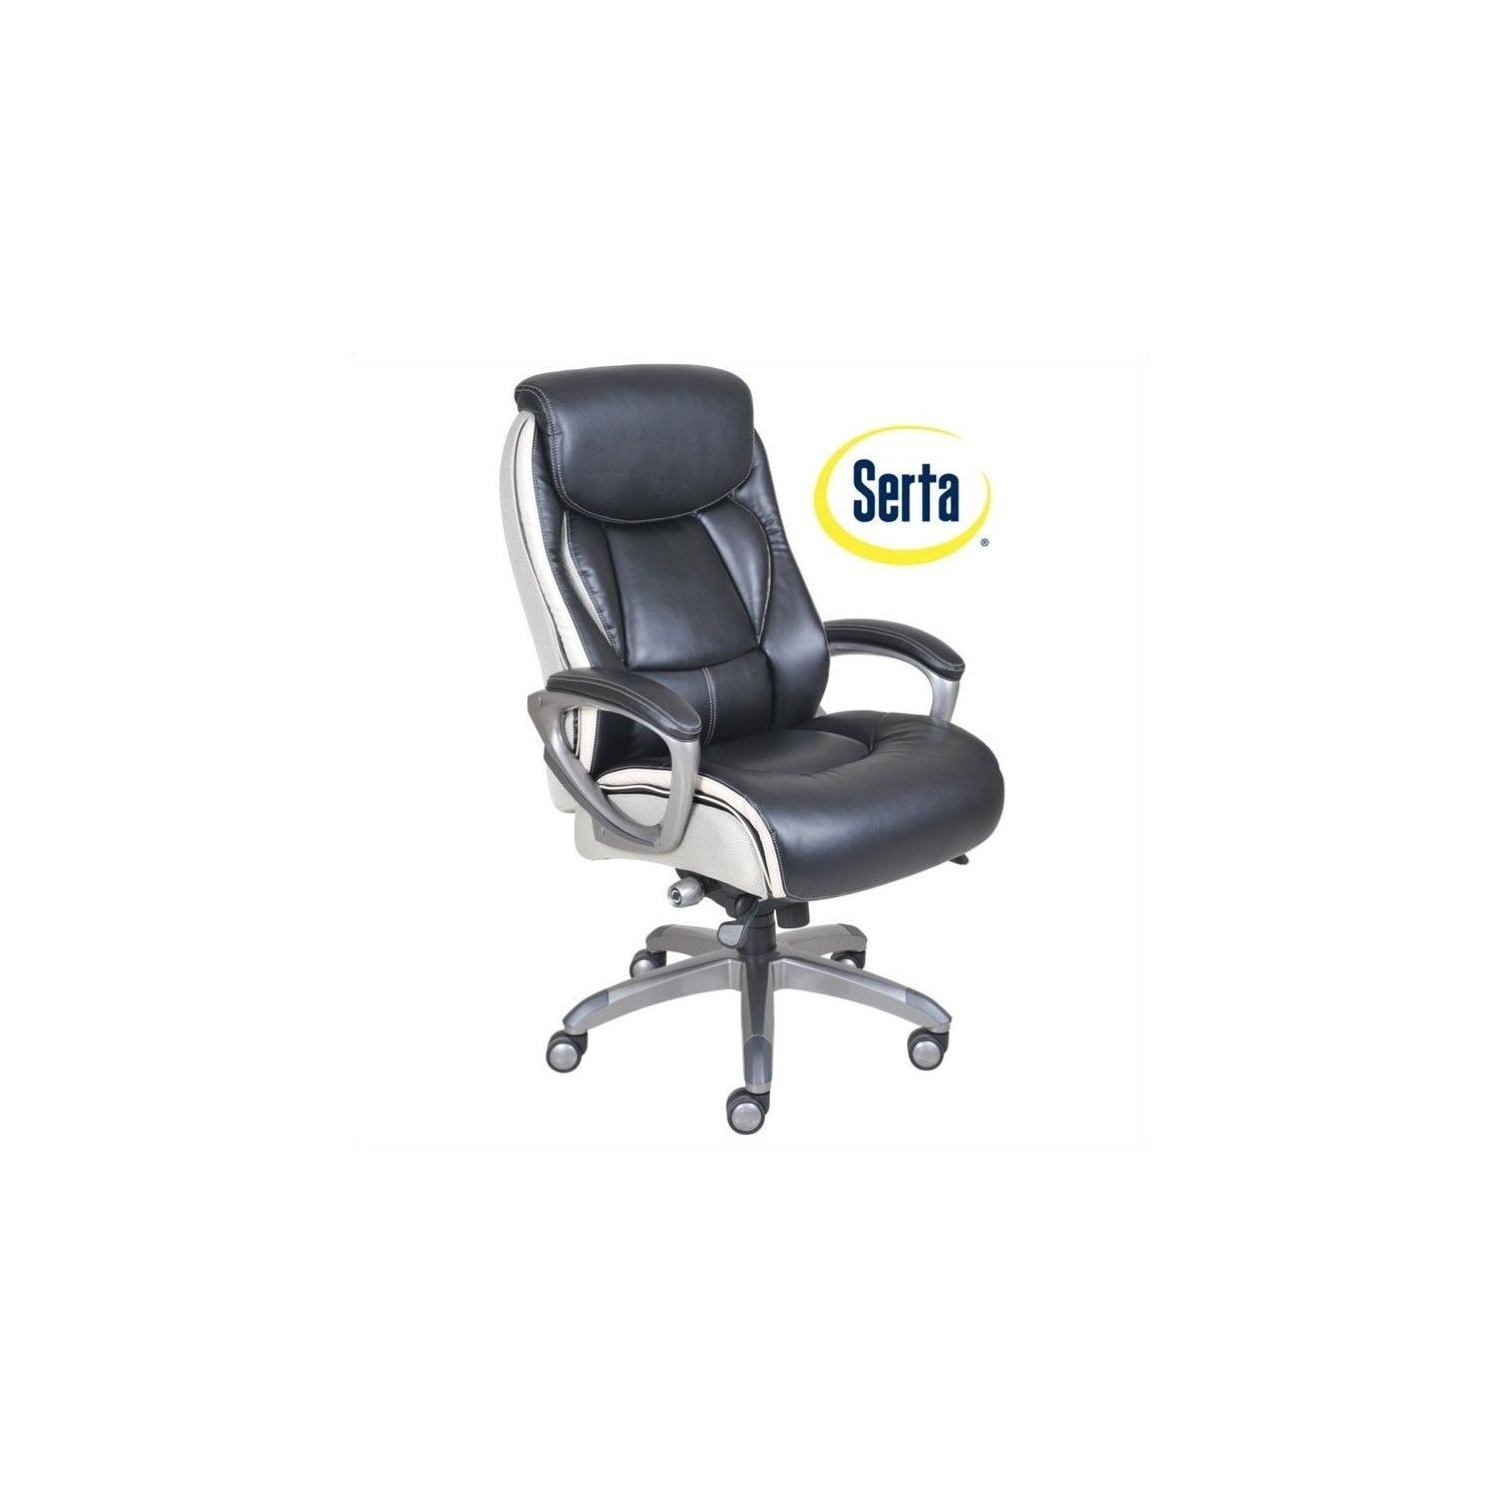 Serta Lautner Executive Office Chair Black Bonded Leather and White Mesh